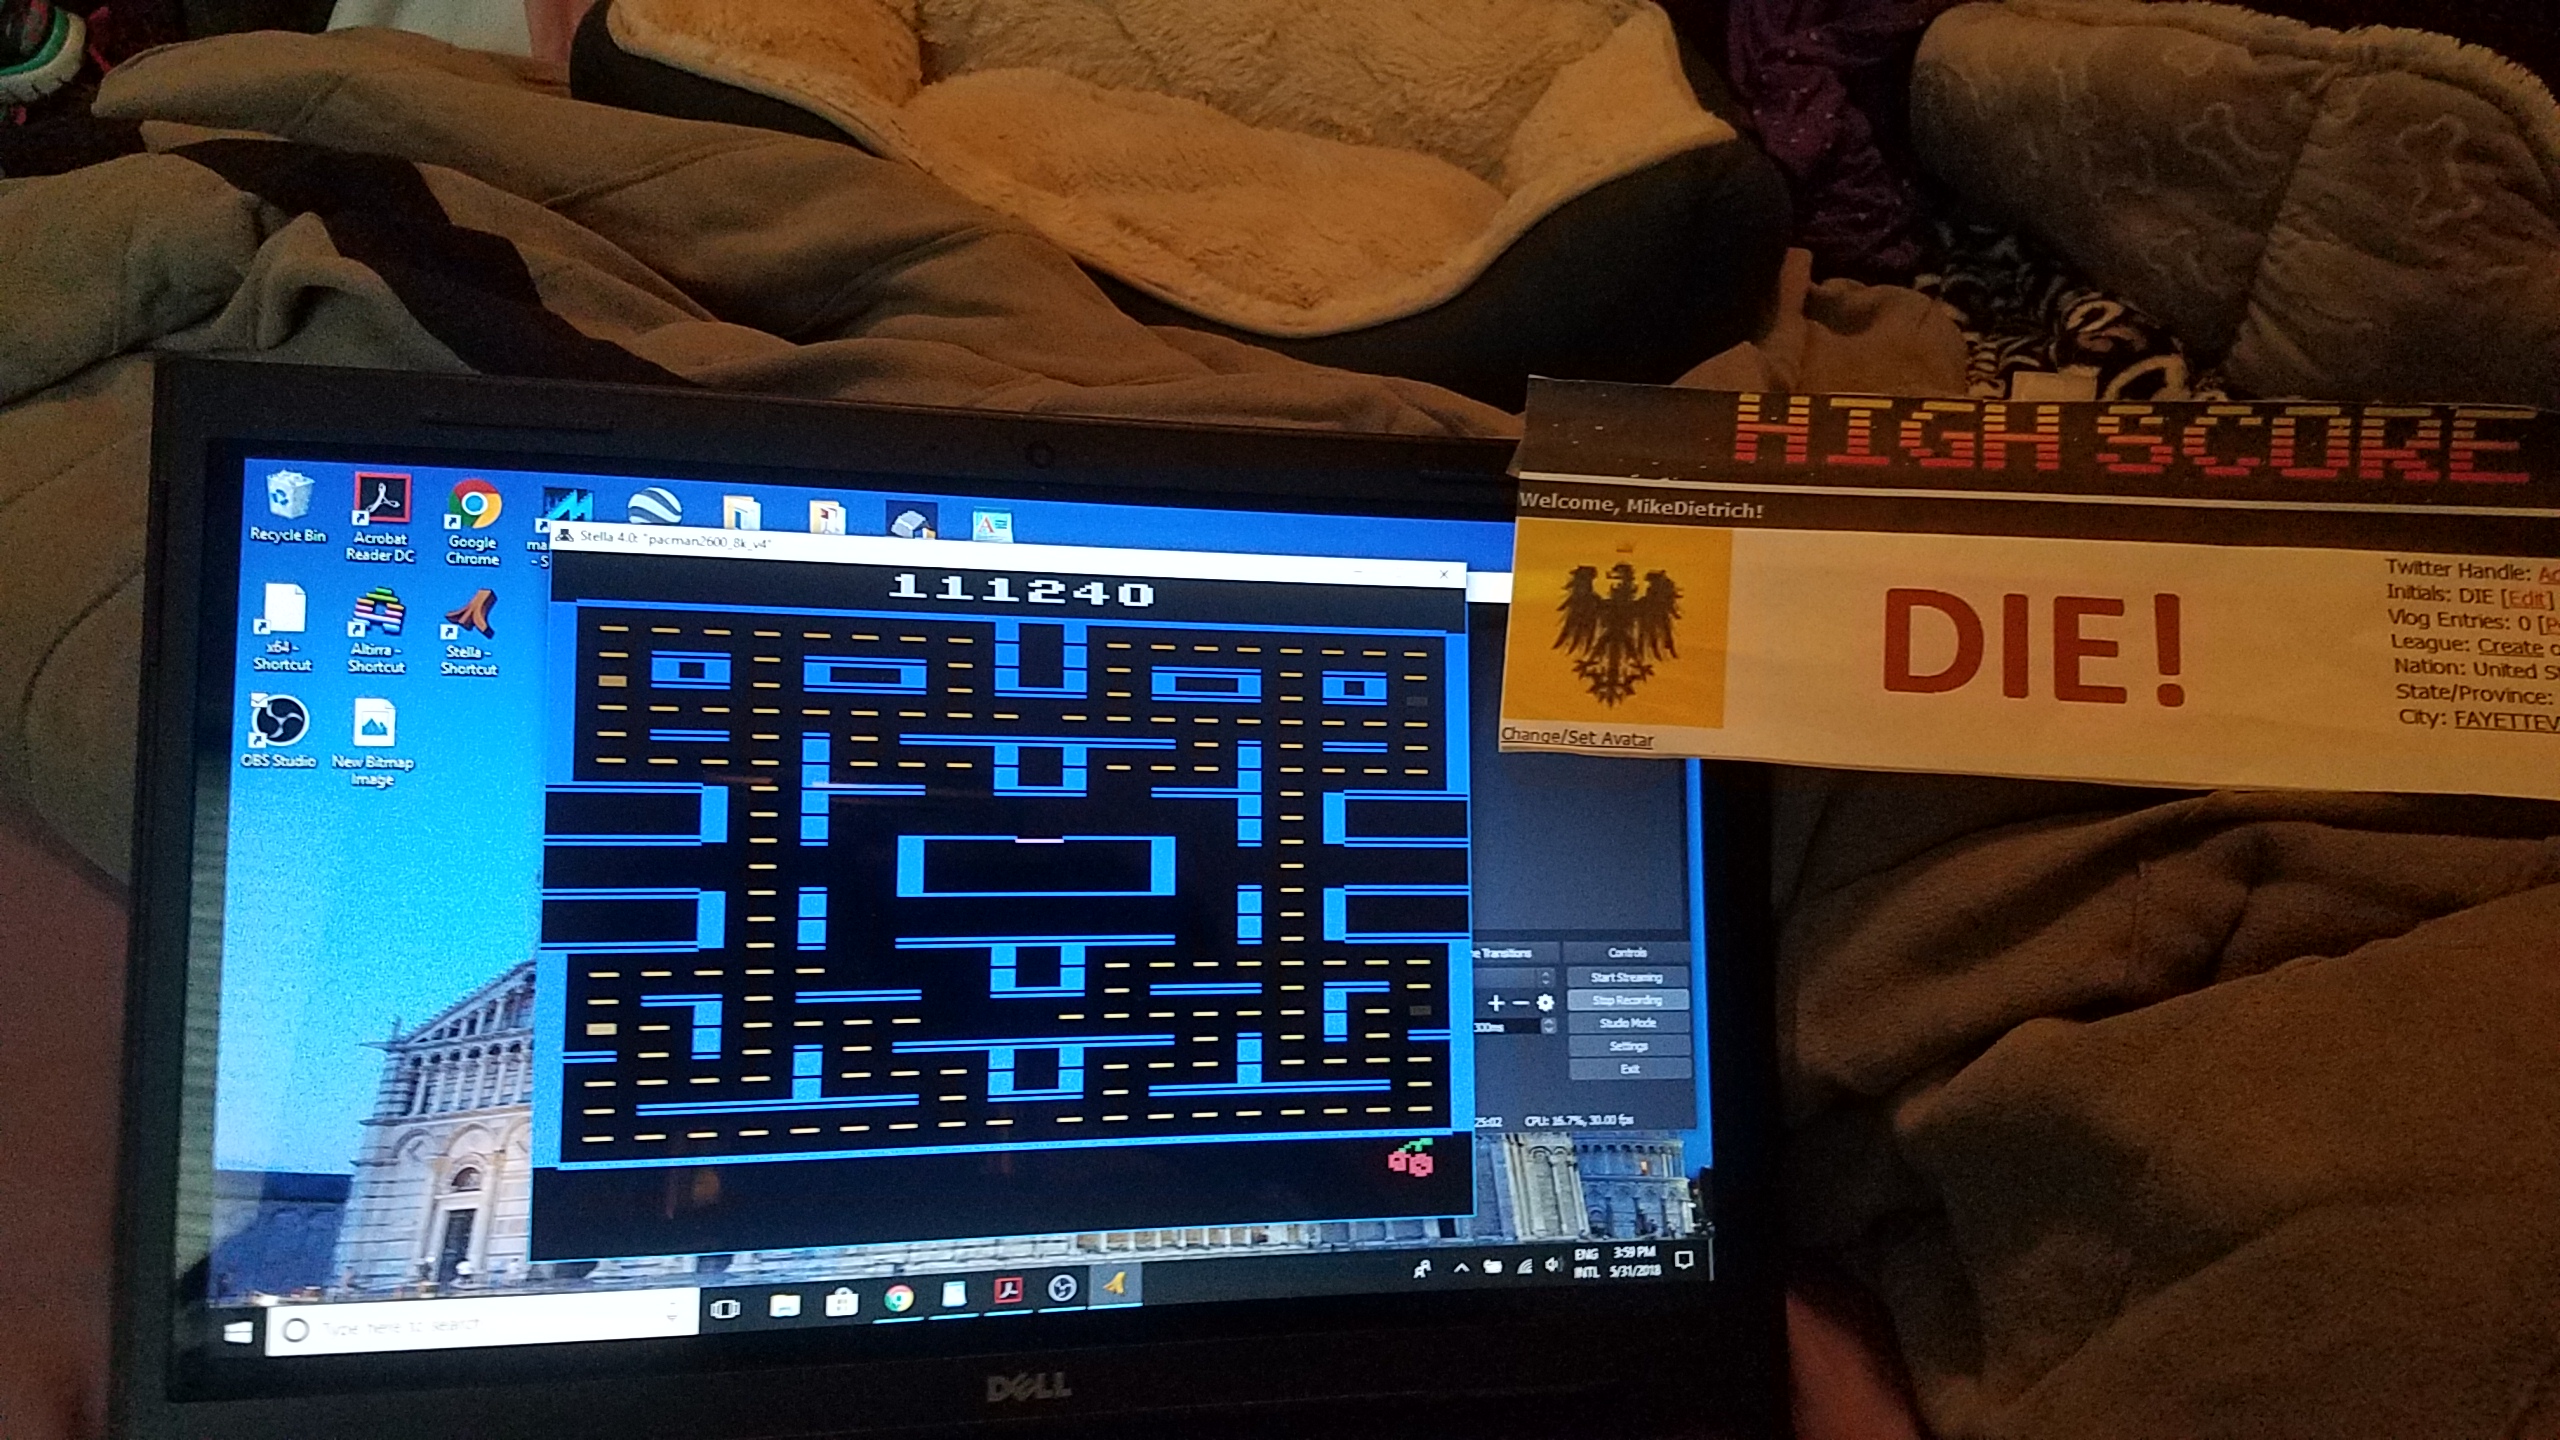 MikeDietrich: Pac-Man 2600 [8K Version] [Cherries] (Atari 2600 Emulated) 111,240 points on 2018-05-31 15:07:36